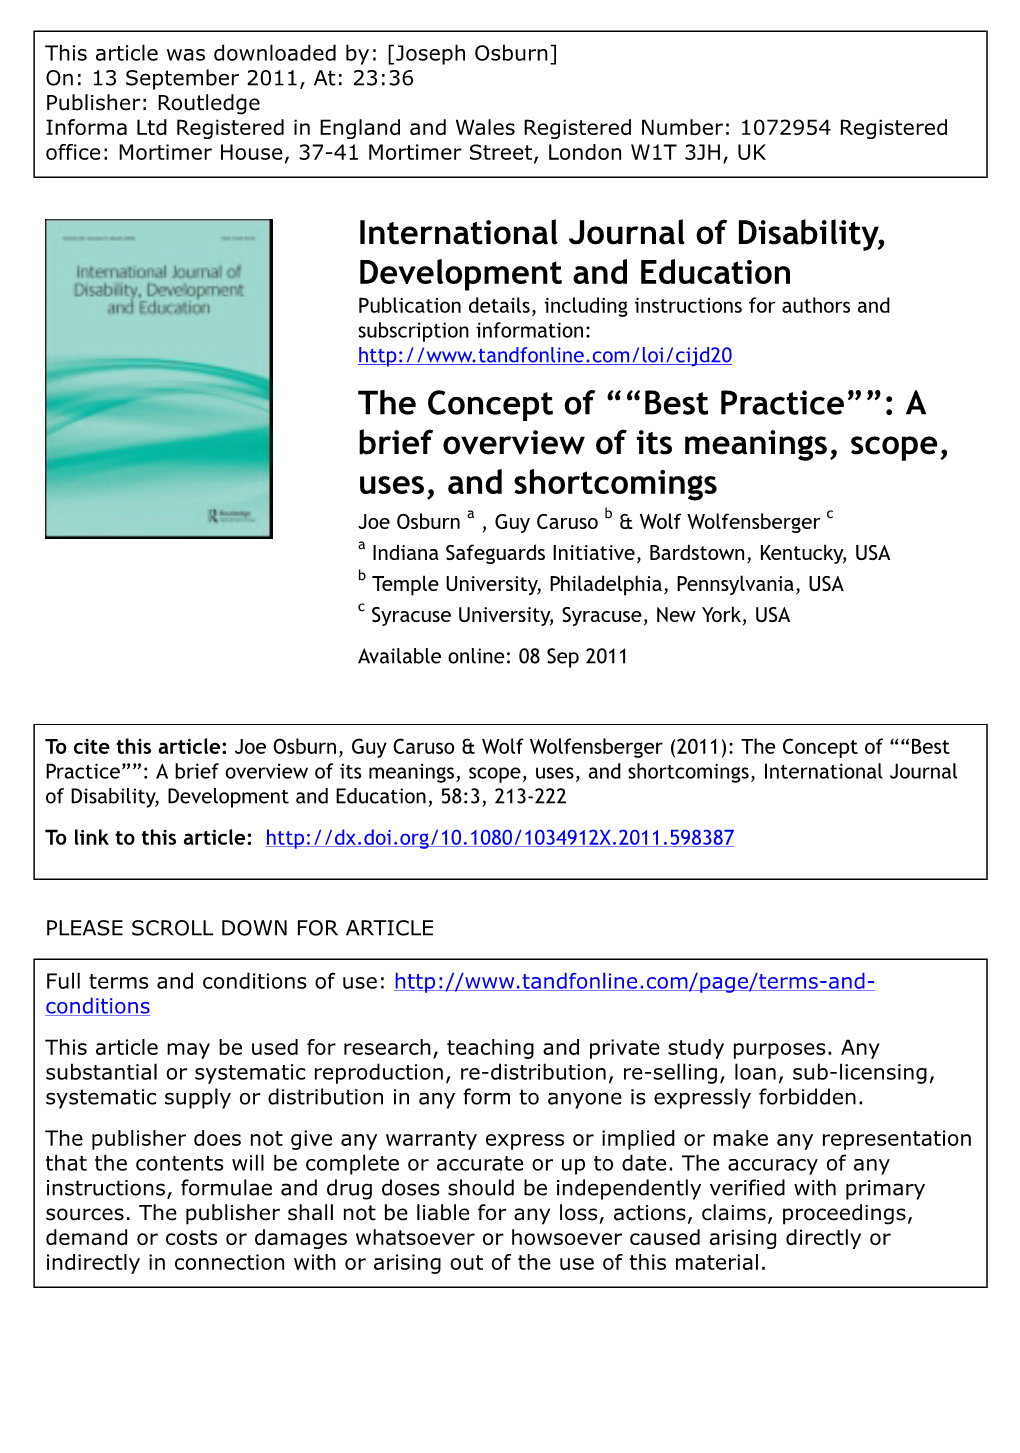 The Concept of “Best Practice”: a Brief Overview of Its Meanings, Scope, Uses, and Shortcomings Joe Osburna*, Guy Carusob and Wolf Wolfensbergerc